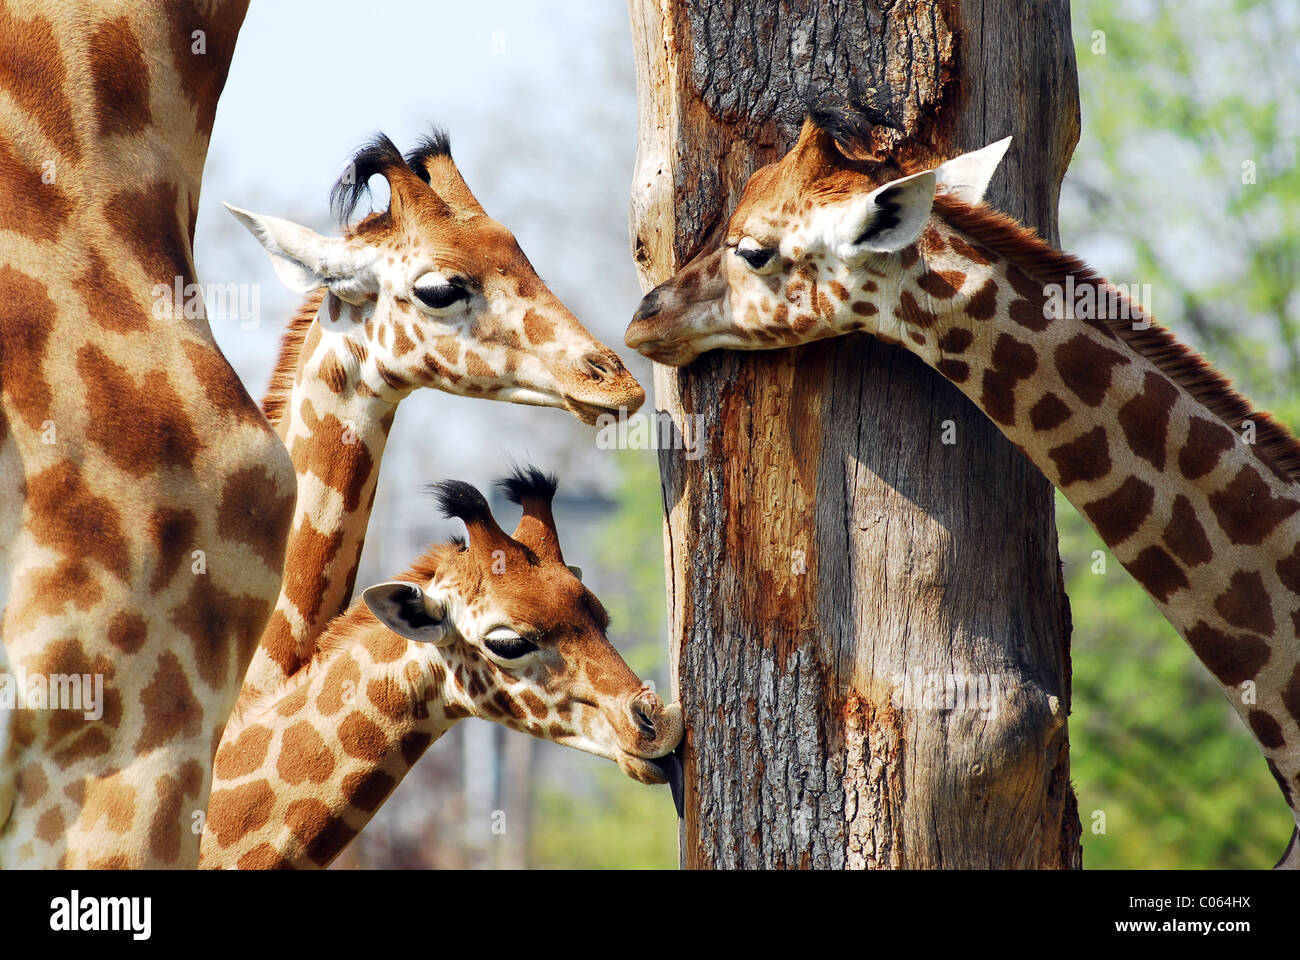 Three young giraffes (Camelopardalis) near a trunk of tree Stock Photo